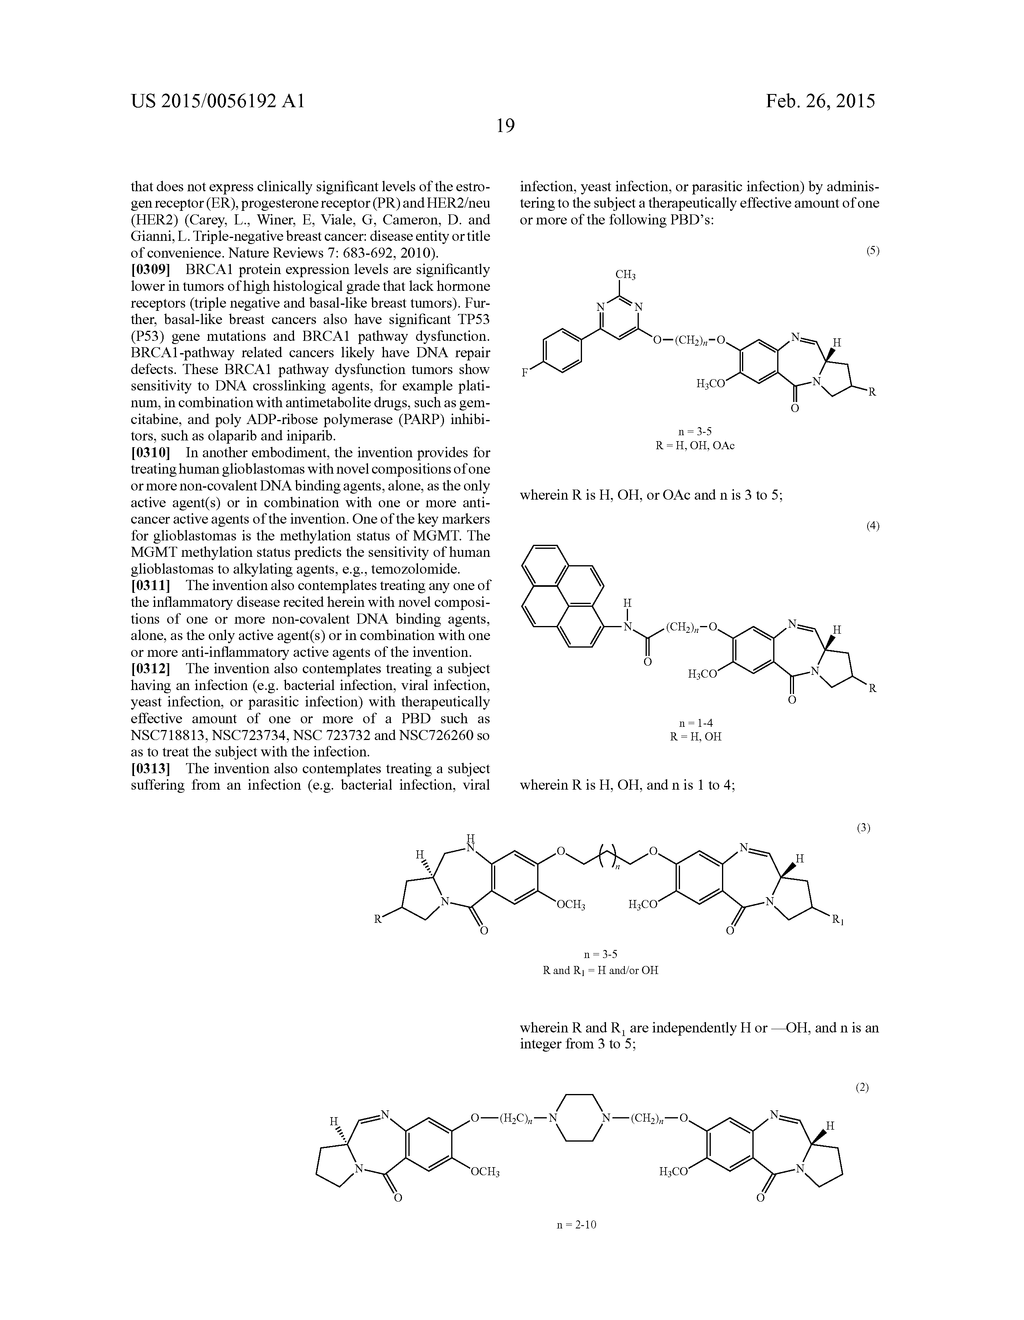 NOVEL COMPOSITIONS OF COMBINATIONS OF NON-COVALENT DNA BINDING AGENTS AND     ANTI-CANCER AND/OR ANTI-INFLAMMATORY AGENTS AND THEIR USE IN DISEASE     TREATMENT - diagram, schematic, and image 169